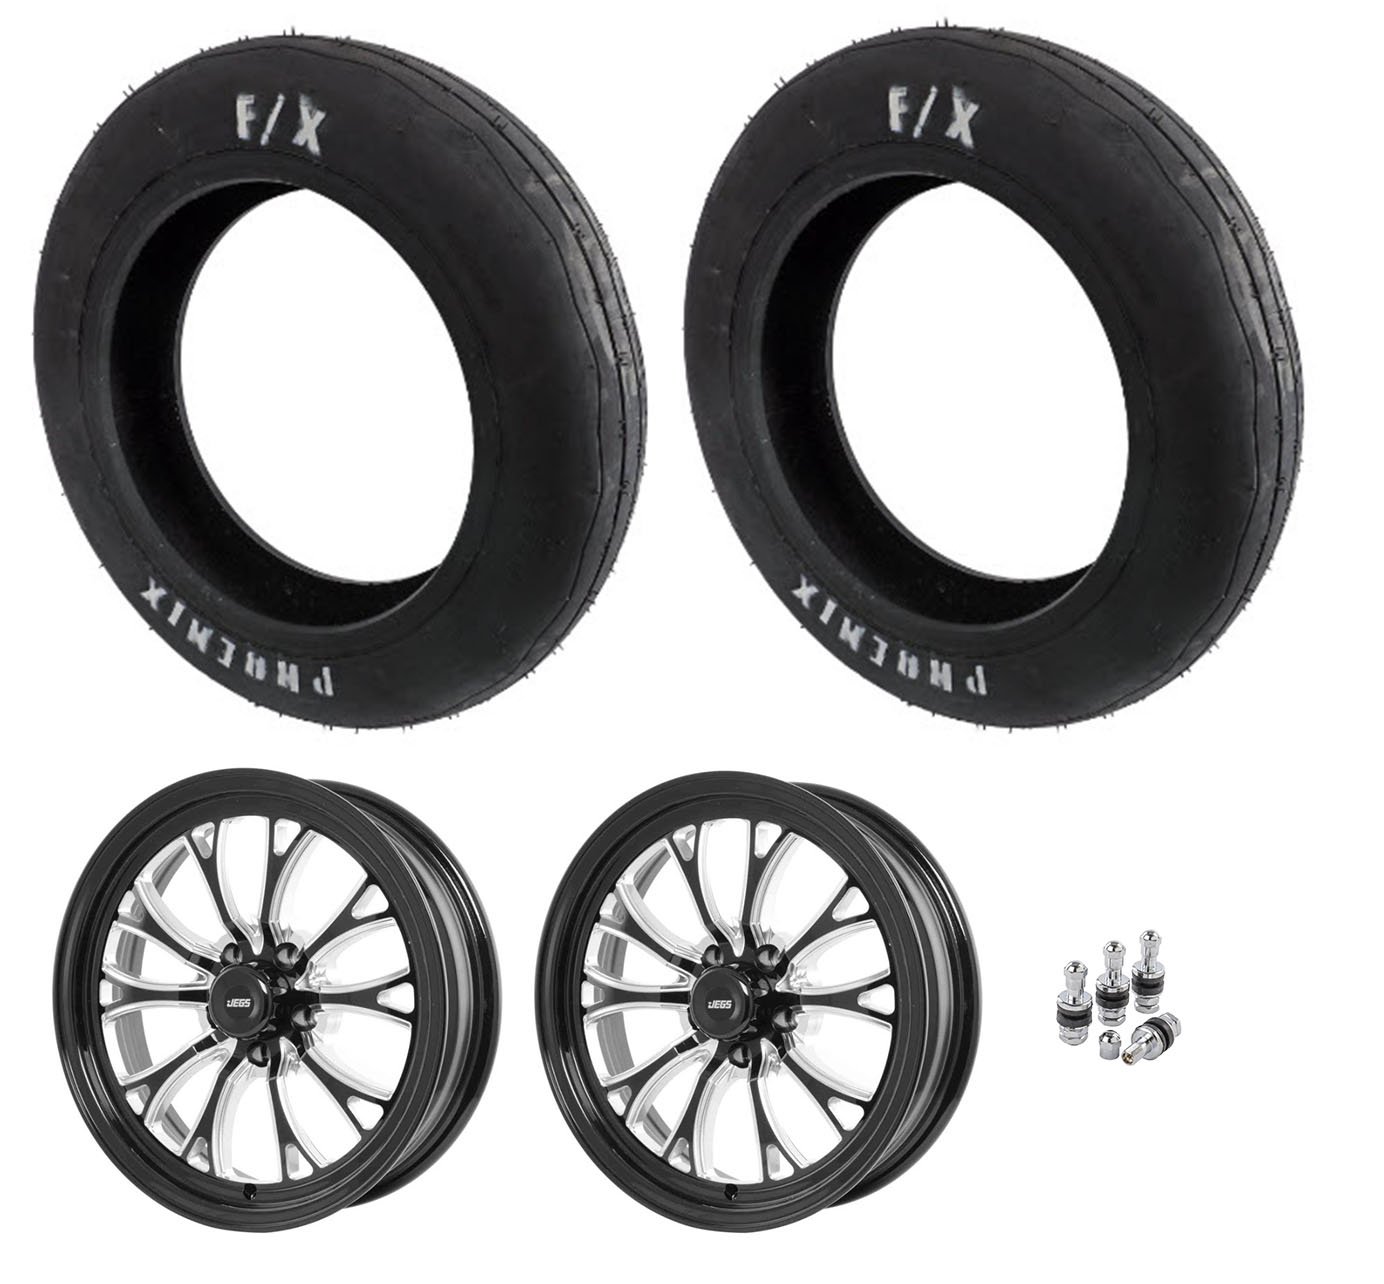 PH427 Front 27" Tires and JEGS SSR Spike Gloss Black Wheel Kit w/5 x 4.50" Wheel Bolt Pattern